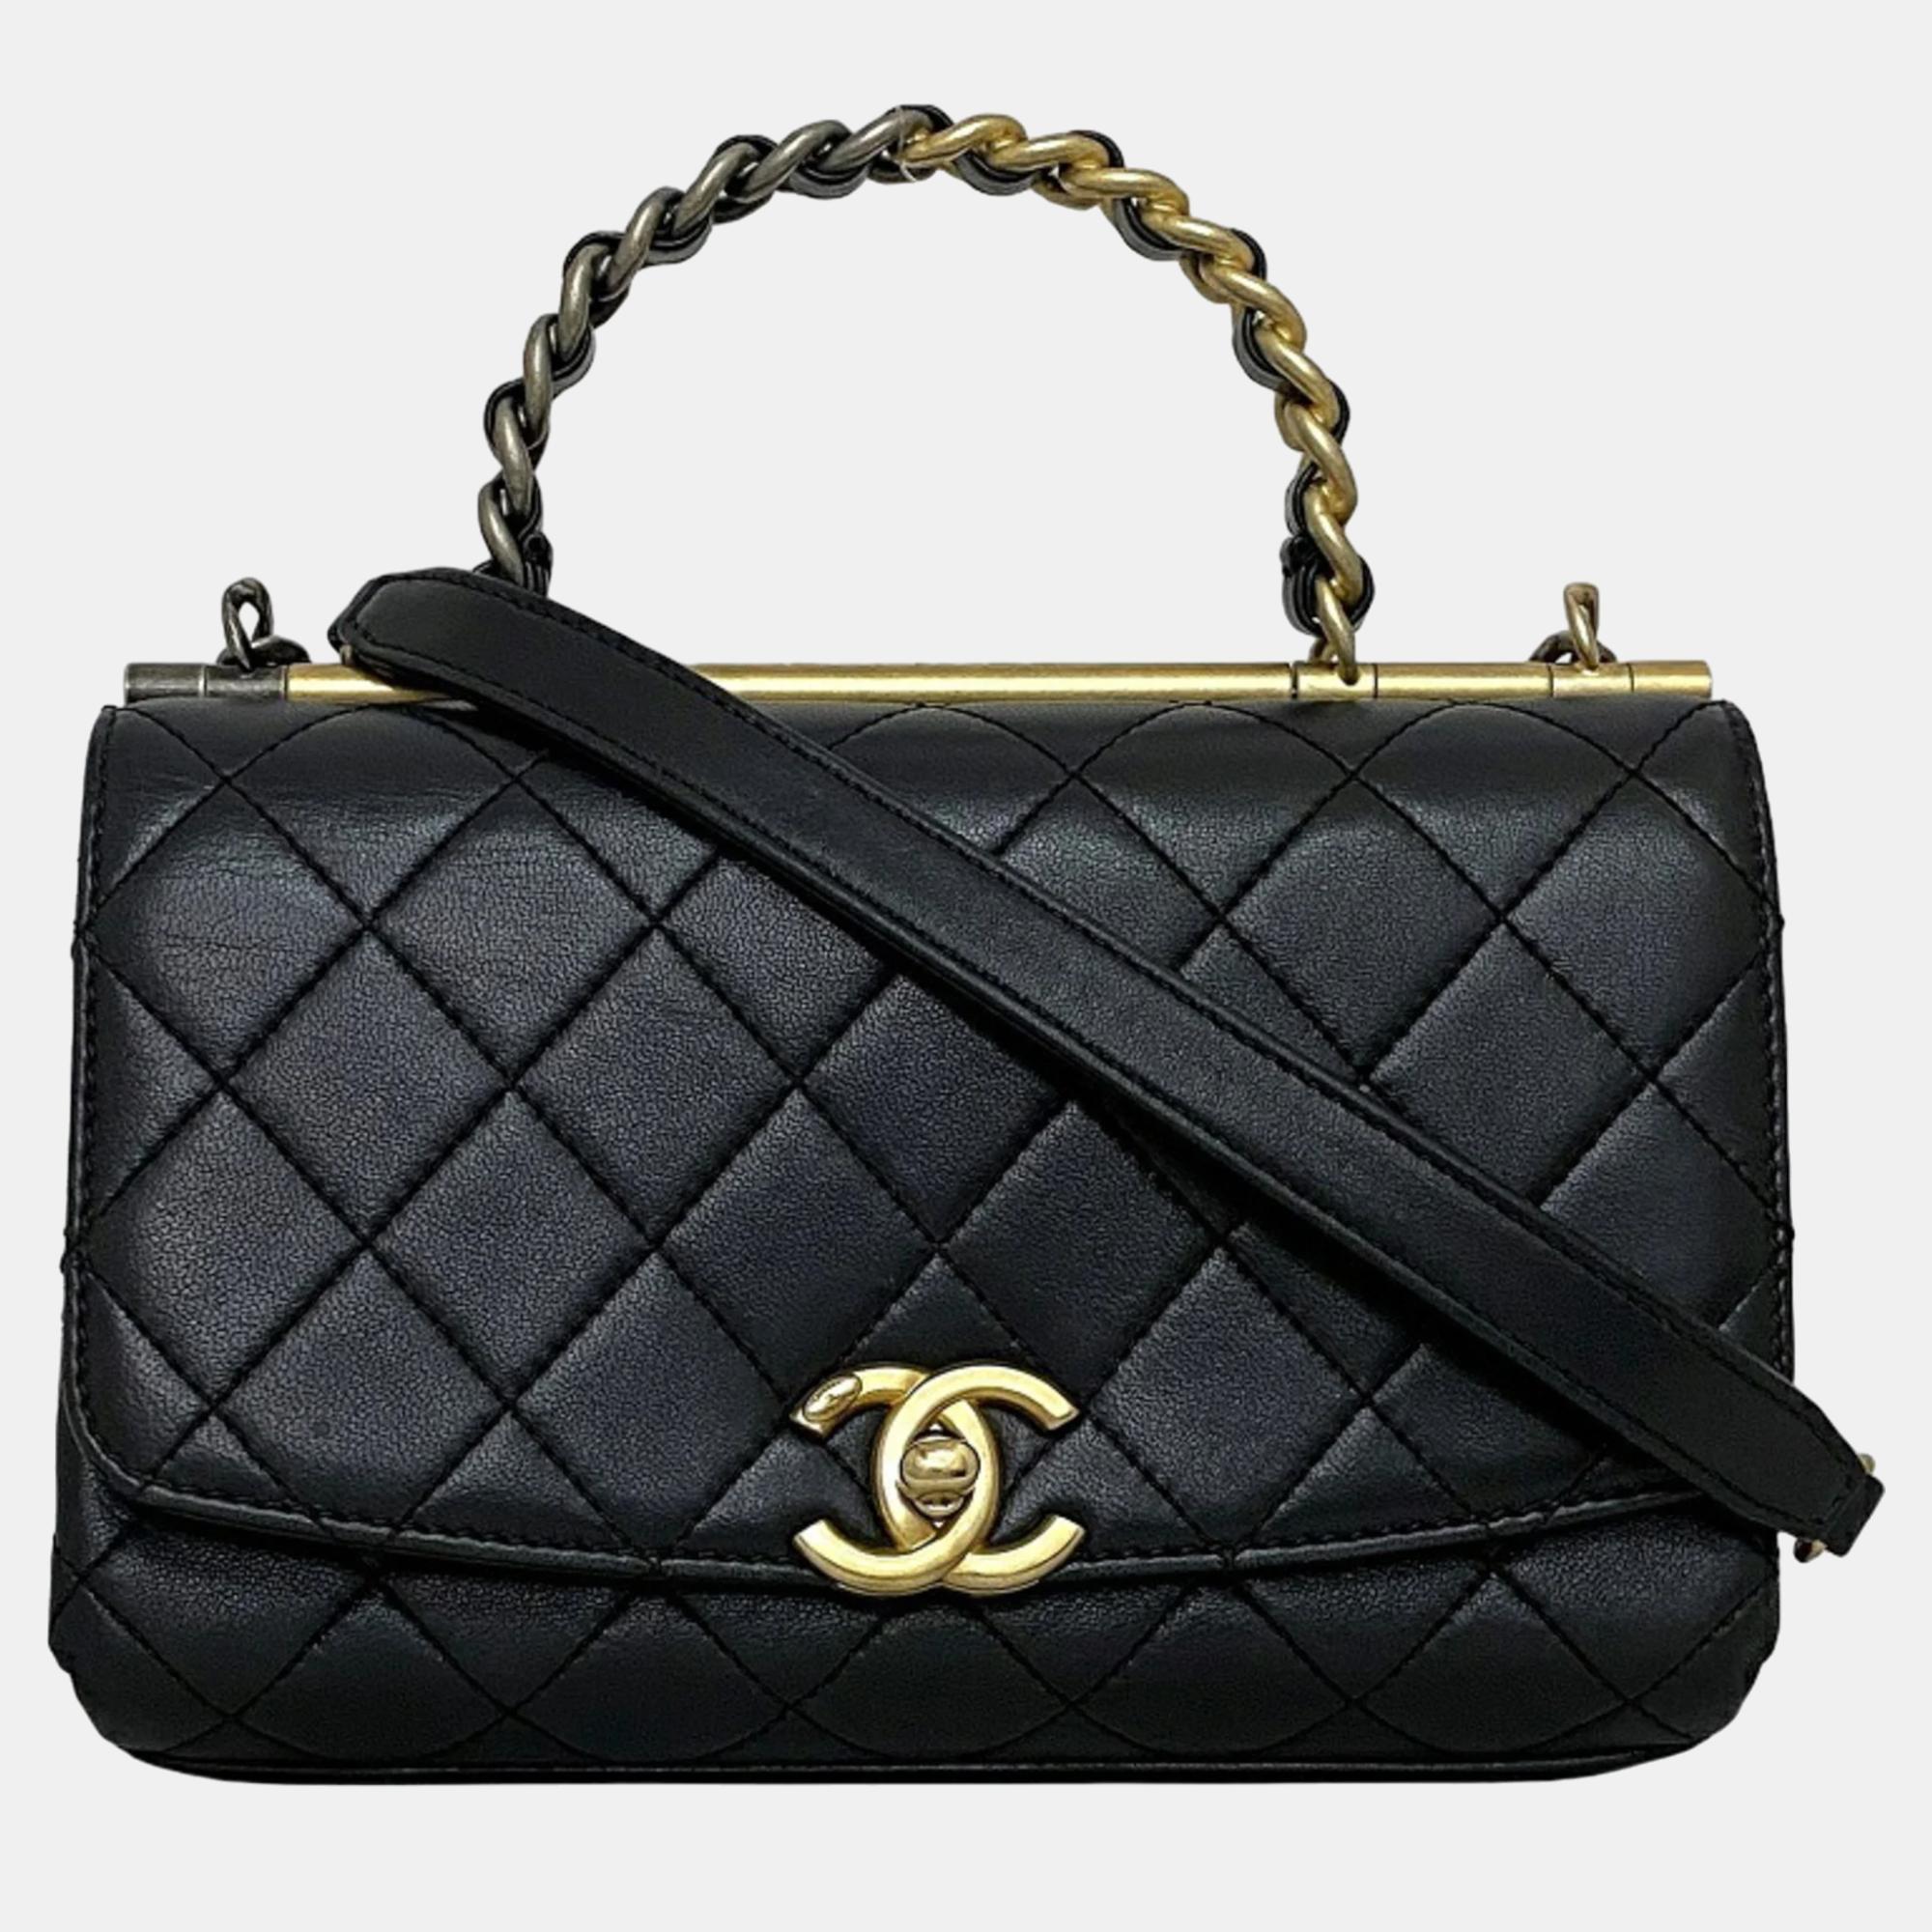 

Chanel Black Quilted Lambskin Leather Small Classic Top Handle Flap Bag